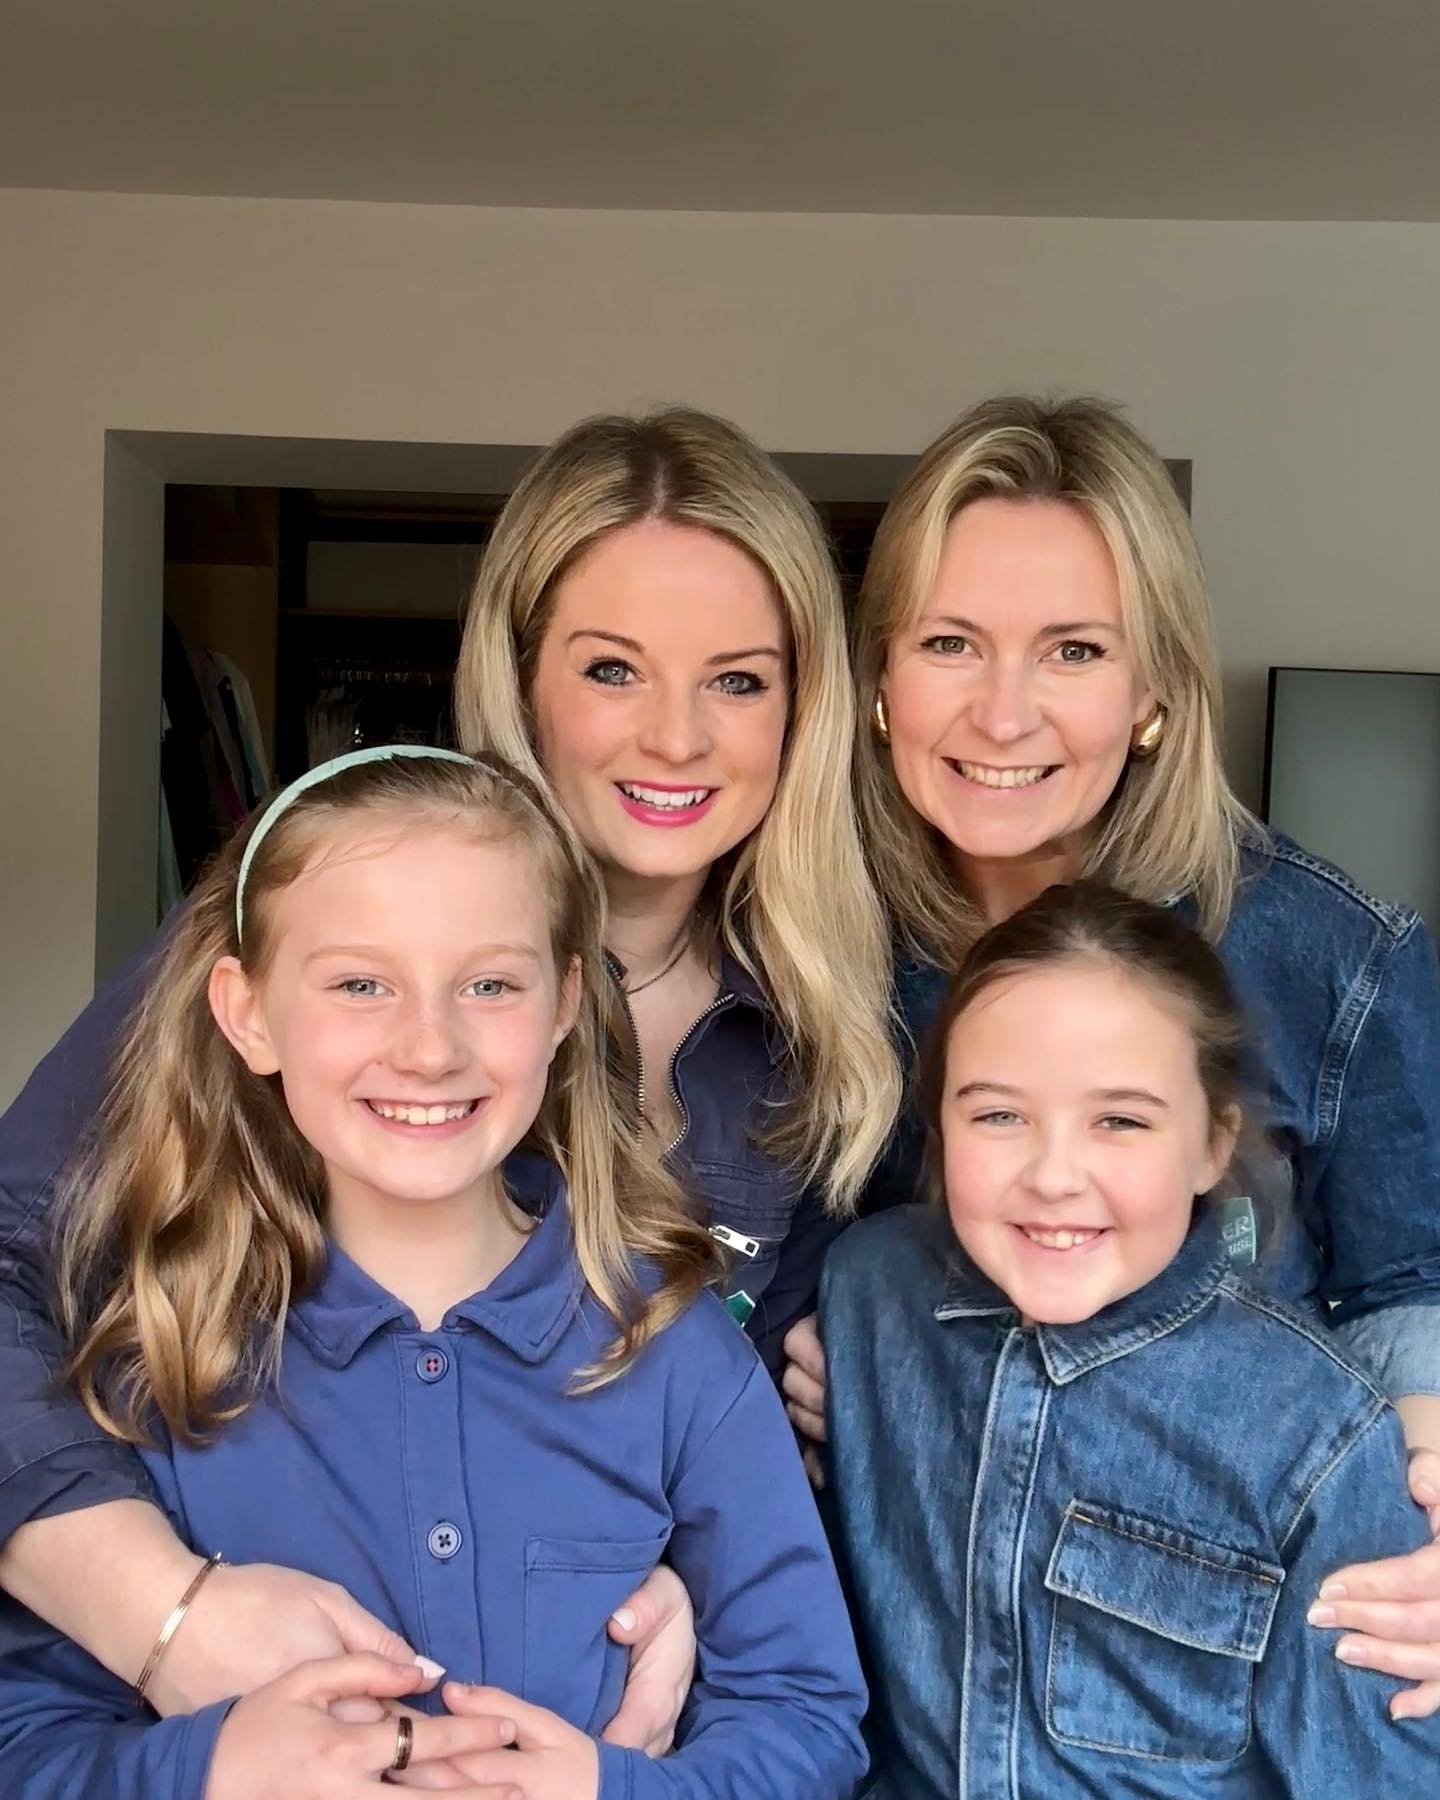 🎥 We had a lot of fun filming with our minis this week for @mystackers. We don&rsquo;t normally share our families on our socials but this was a special project and it meant so much more to share it with two of our girls - check out our most recent 